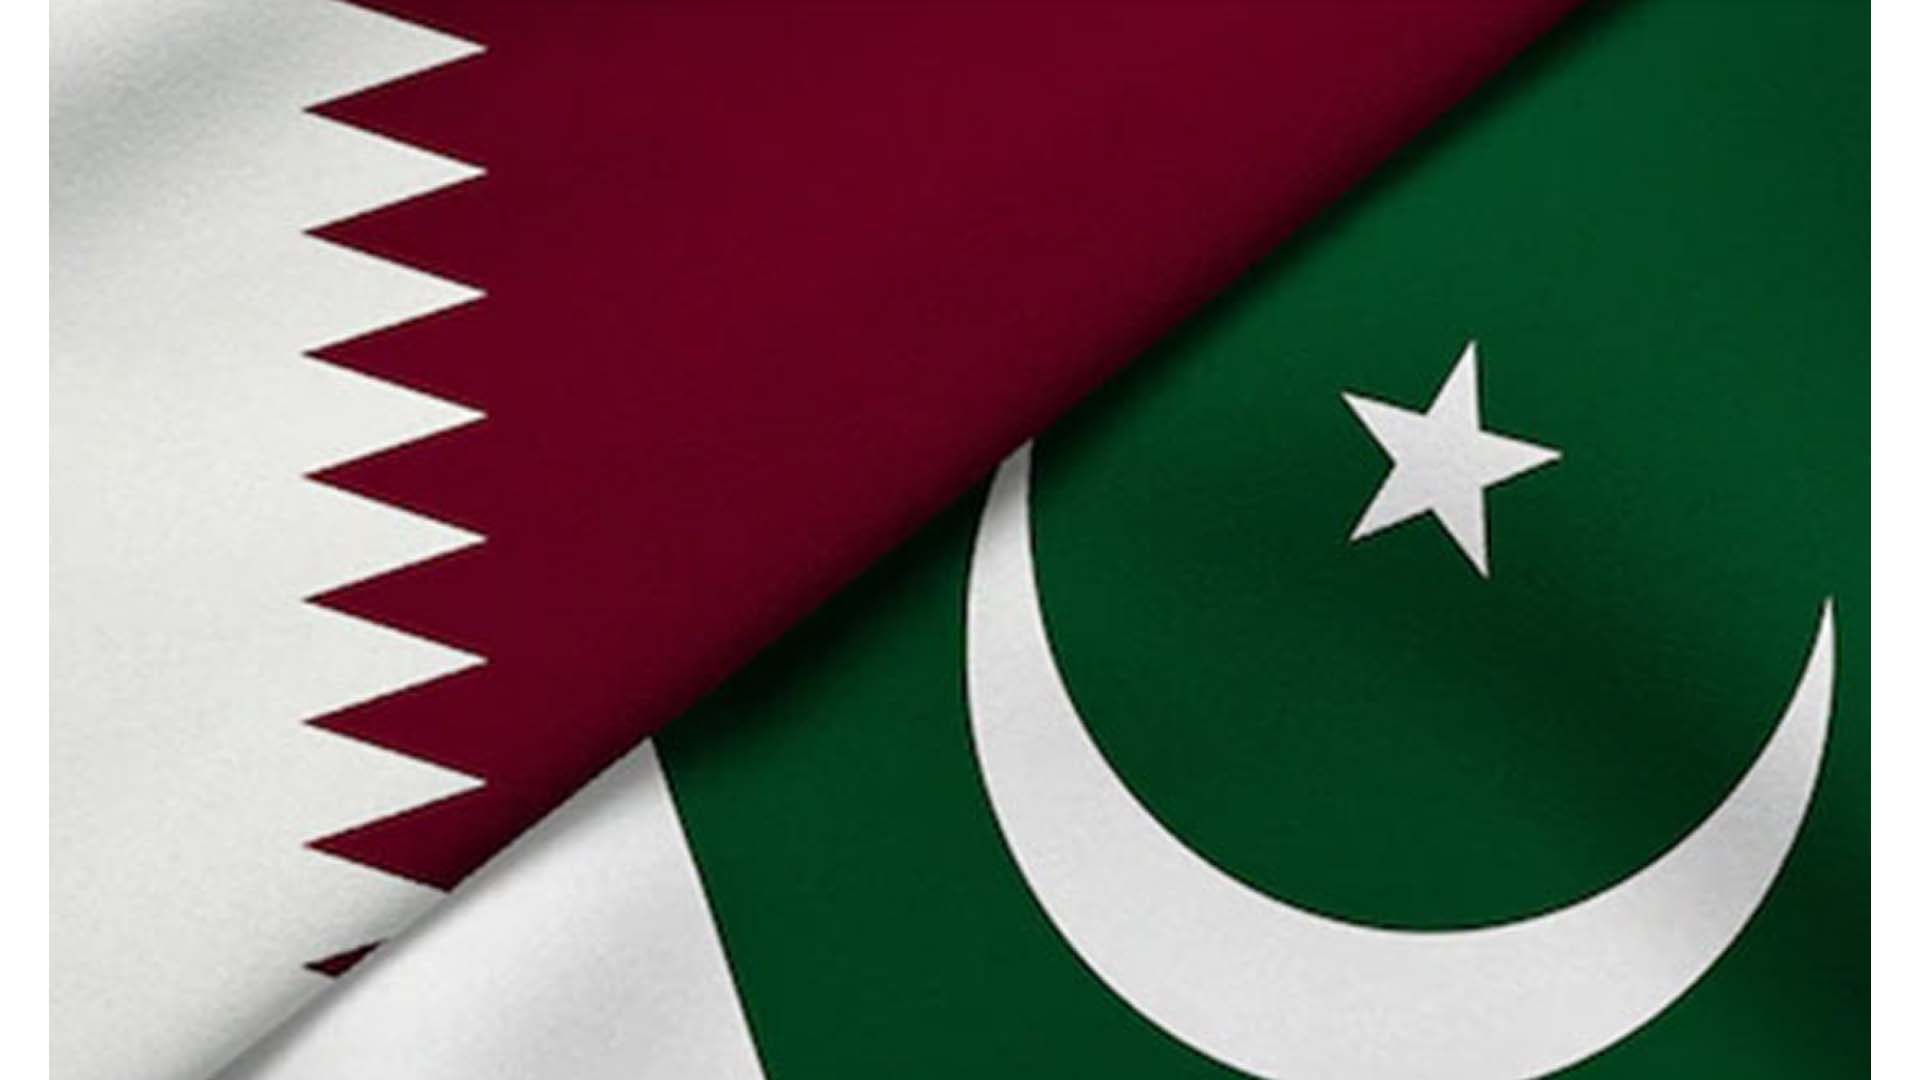 SPECIAL REPORT: Pakistan, Qatar sign new LNG import agreement